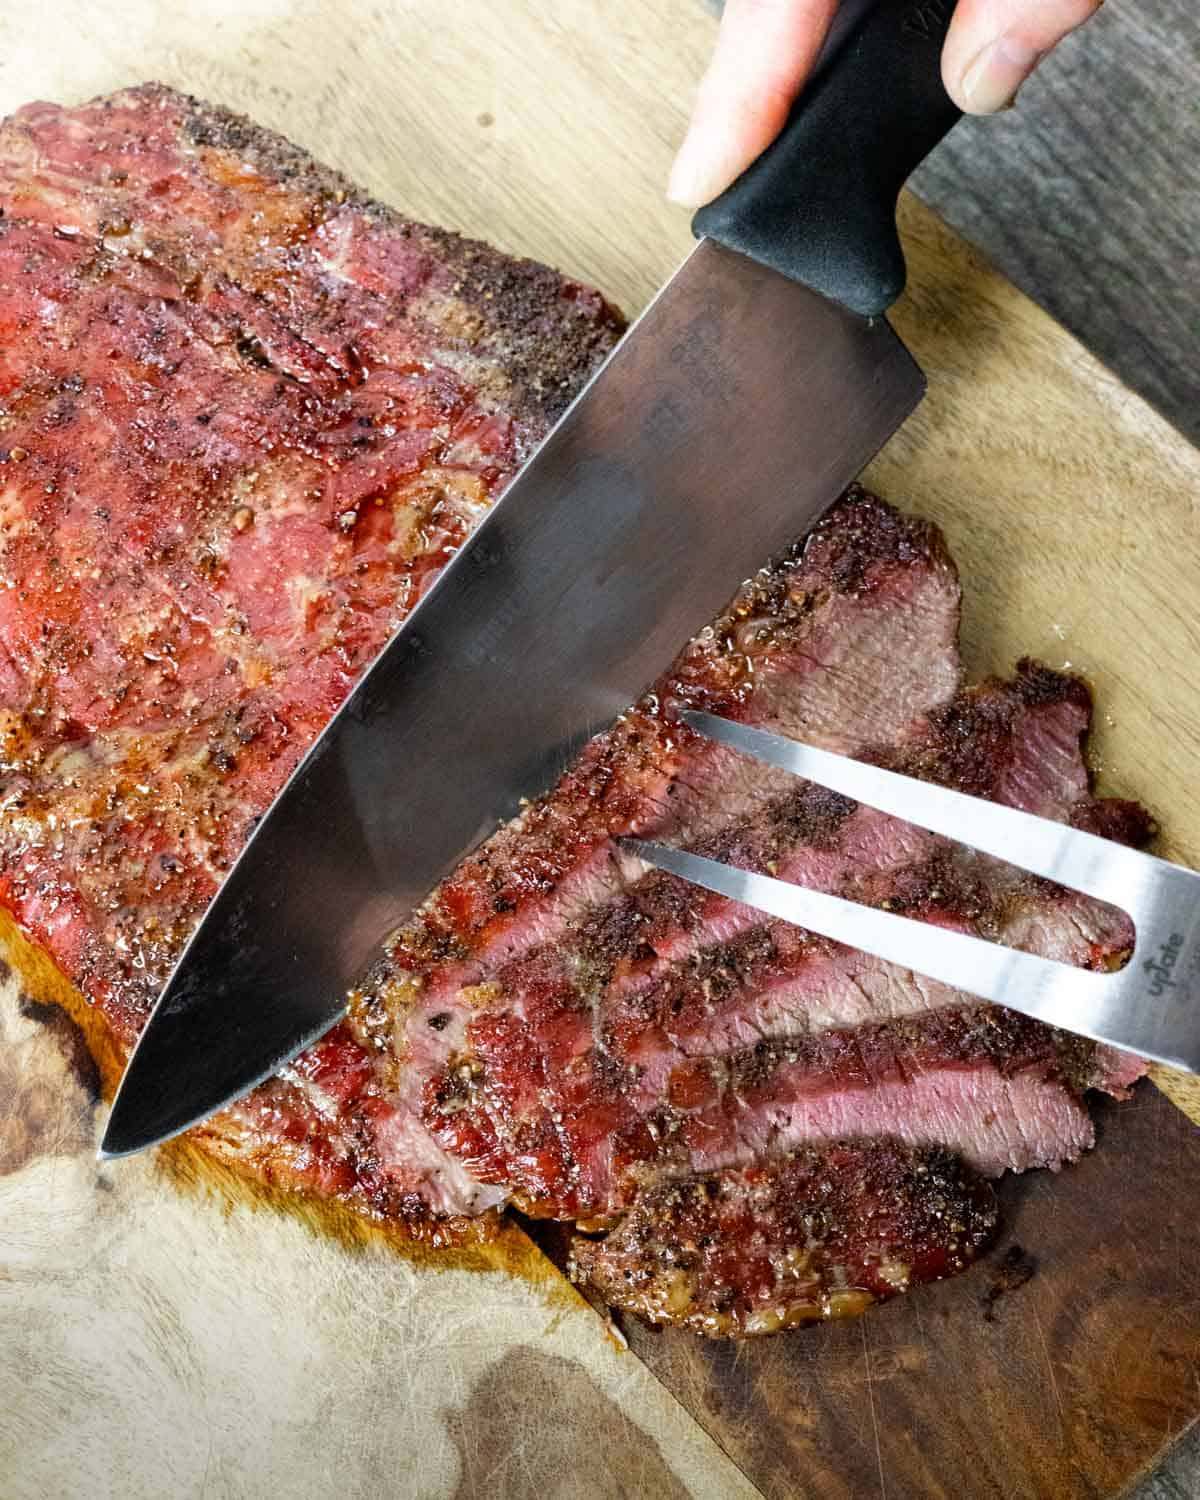 Partially sliced smoked flank on a board with carving fork and knife slicing a new thin slice.